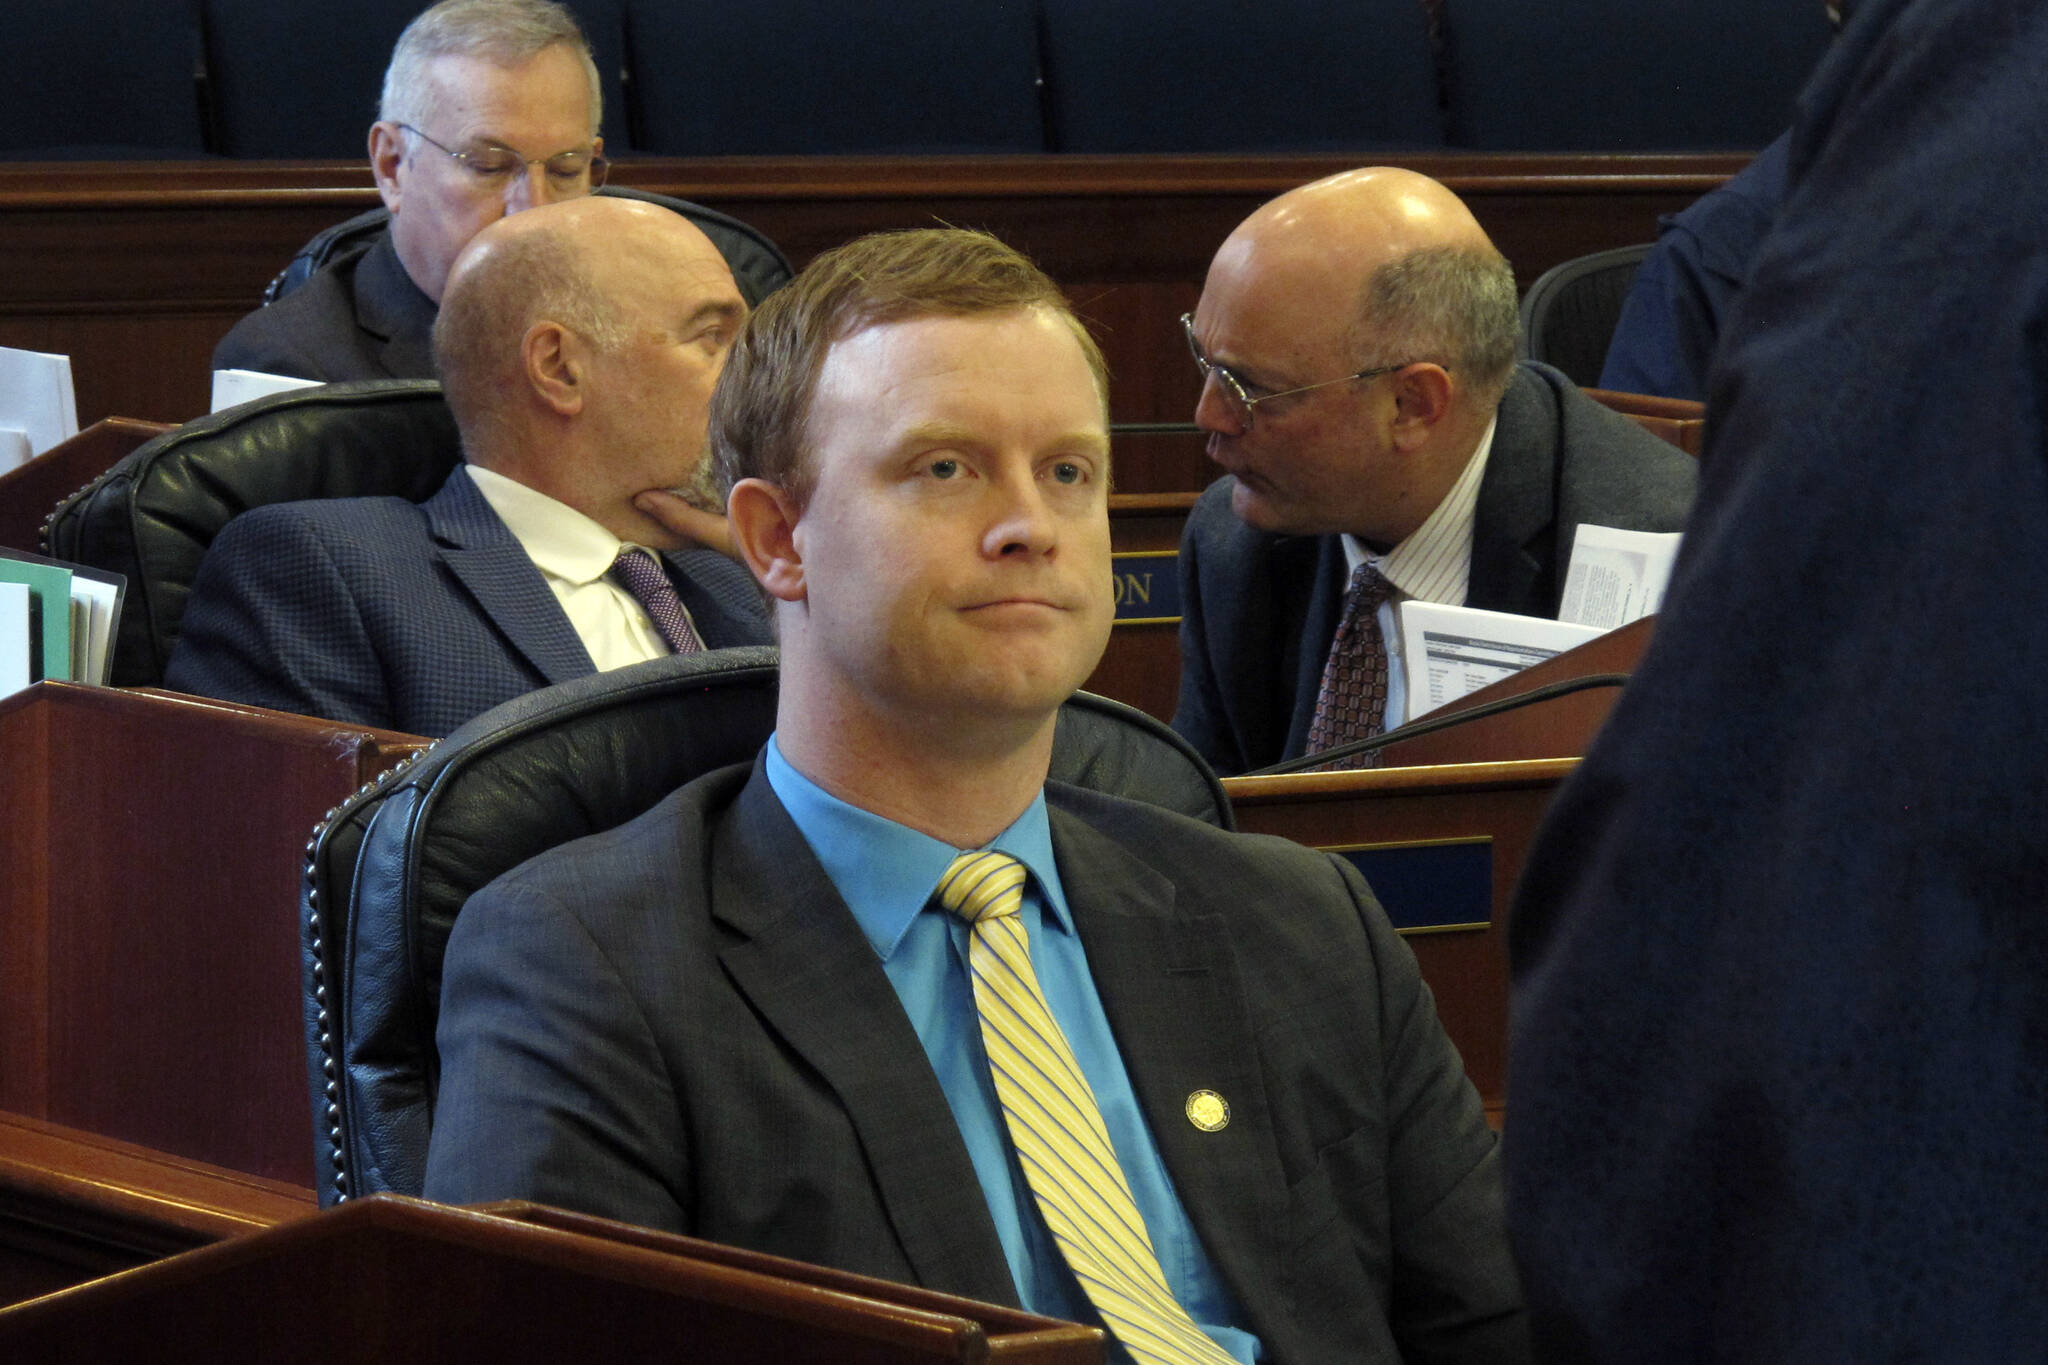 FILE - Alaska state Rep. David Eastman, R-Wasilla, sits in the House on April 29, 2022, in Juneau, Alaska. Eastman, accused of violating the state constitution's disloyalty clause over his lifetime membership in Oath Keepers, has not condemned the organization in the wake of the Jan. 6, 2021, insurrection at the U.S Capitol. "No, I generally don't condemn groups," Eastman, a Wasilla Republican, said during his bench hearing on Thursday, Dec. 15, 2022, his second day on the witness stand. (AP Photo / Becky Bohrer)